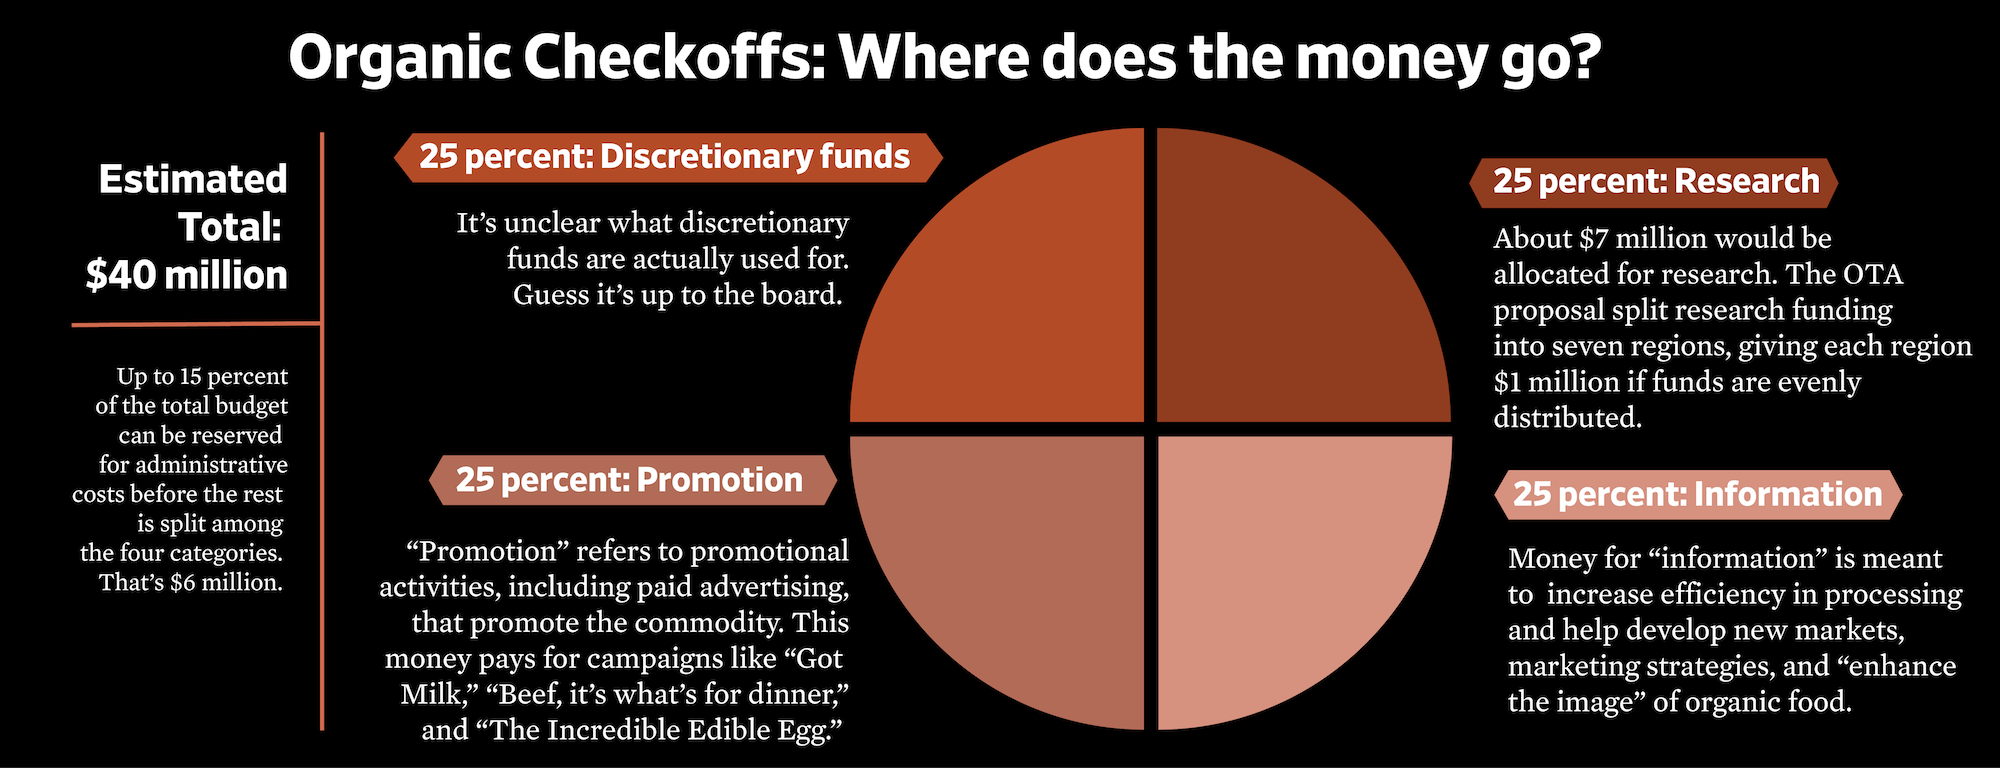 Breakdown of checkoff expenditures